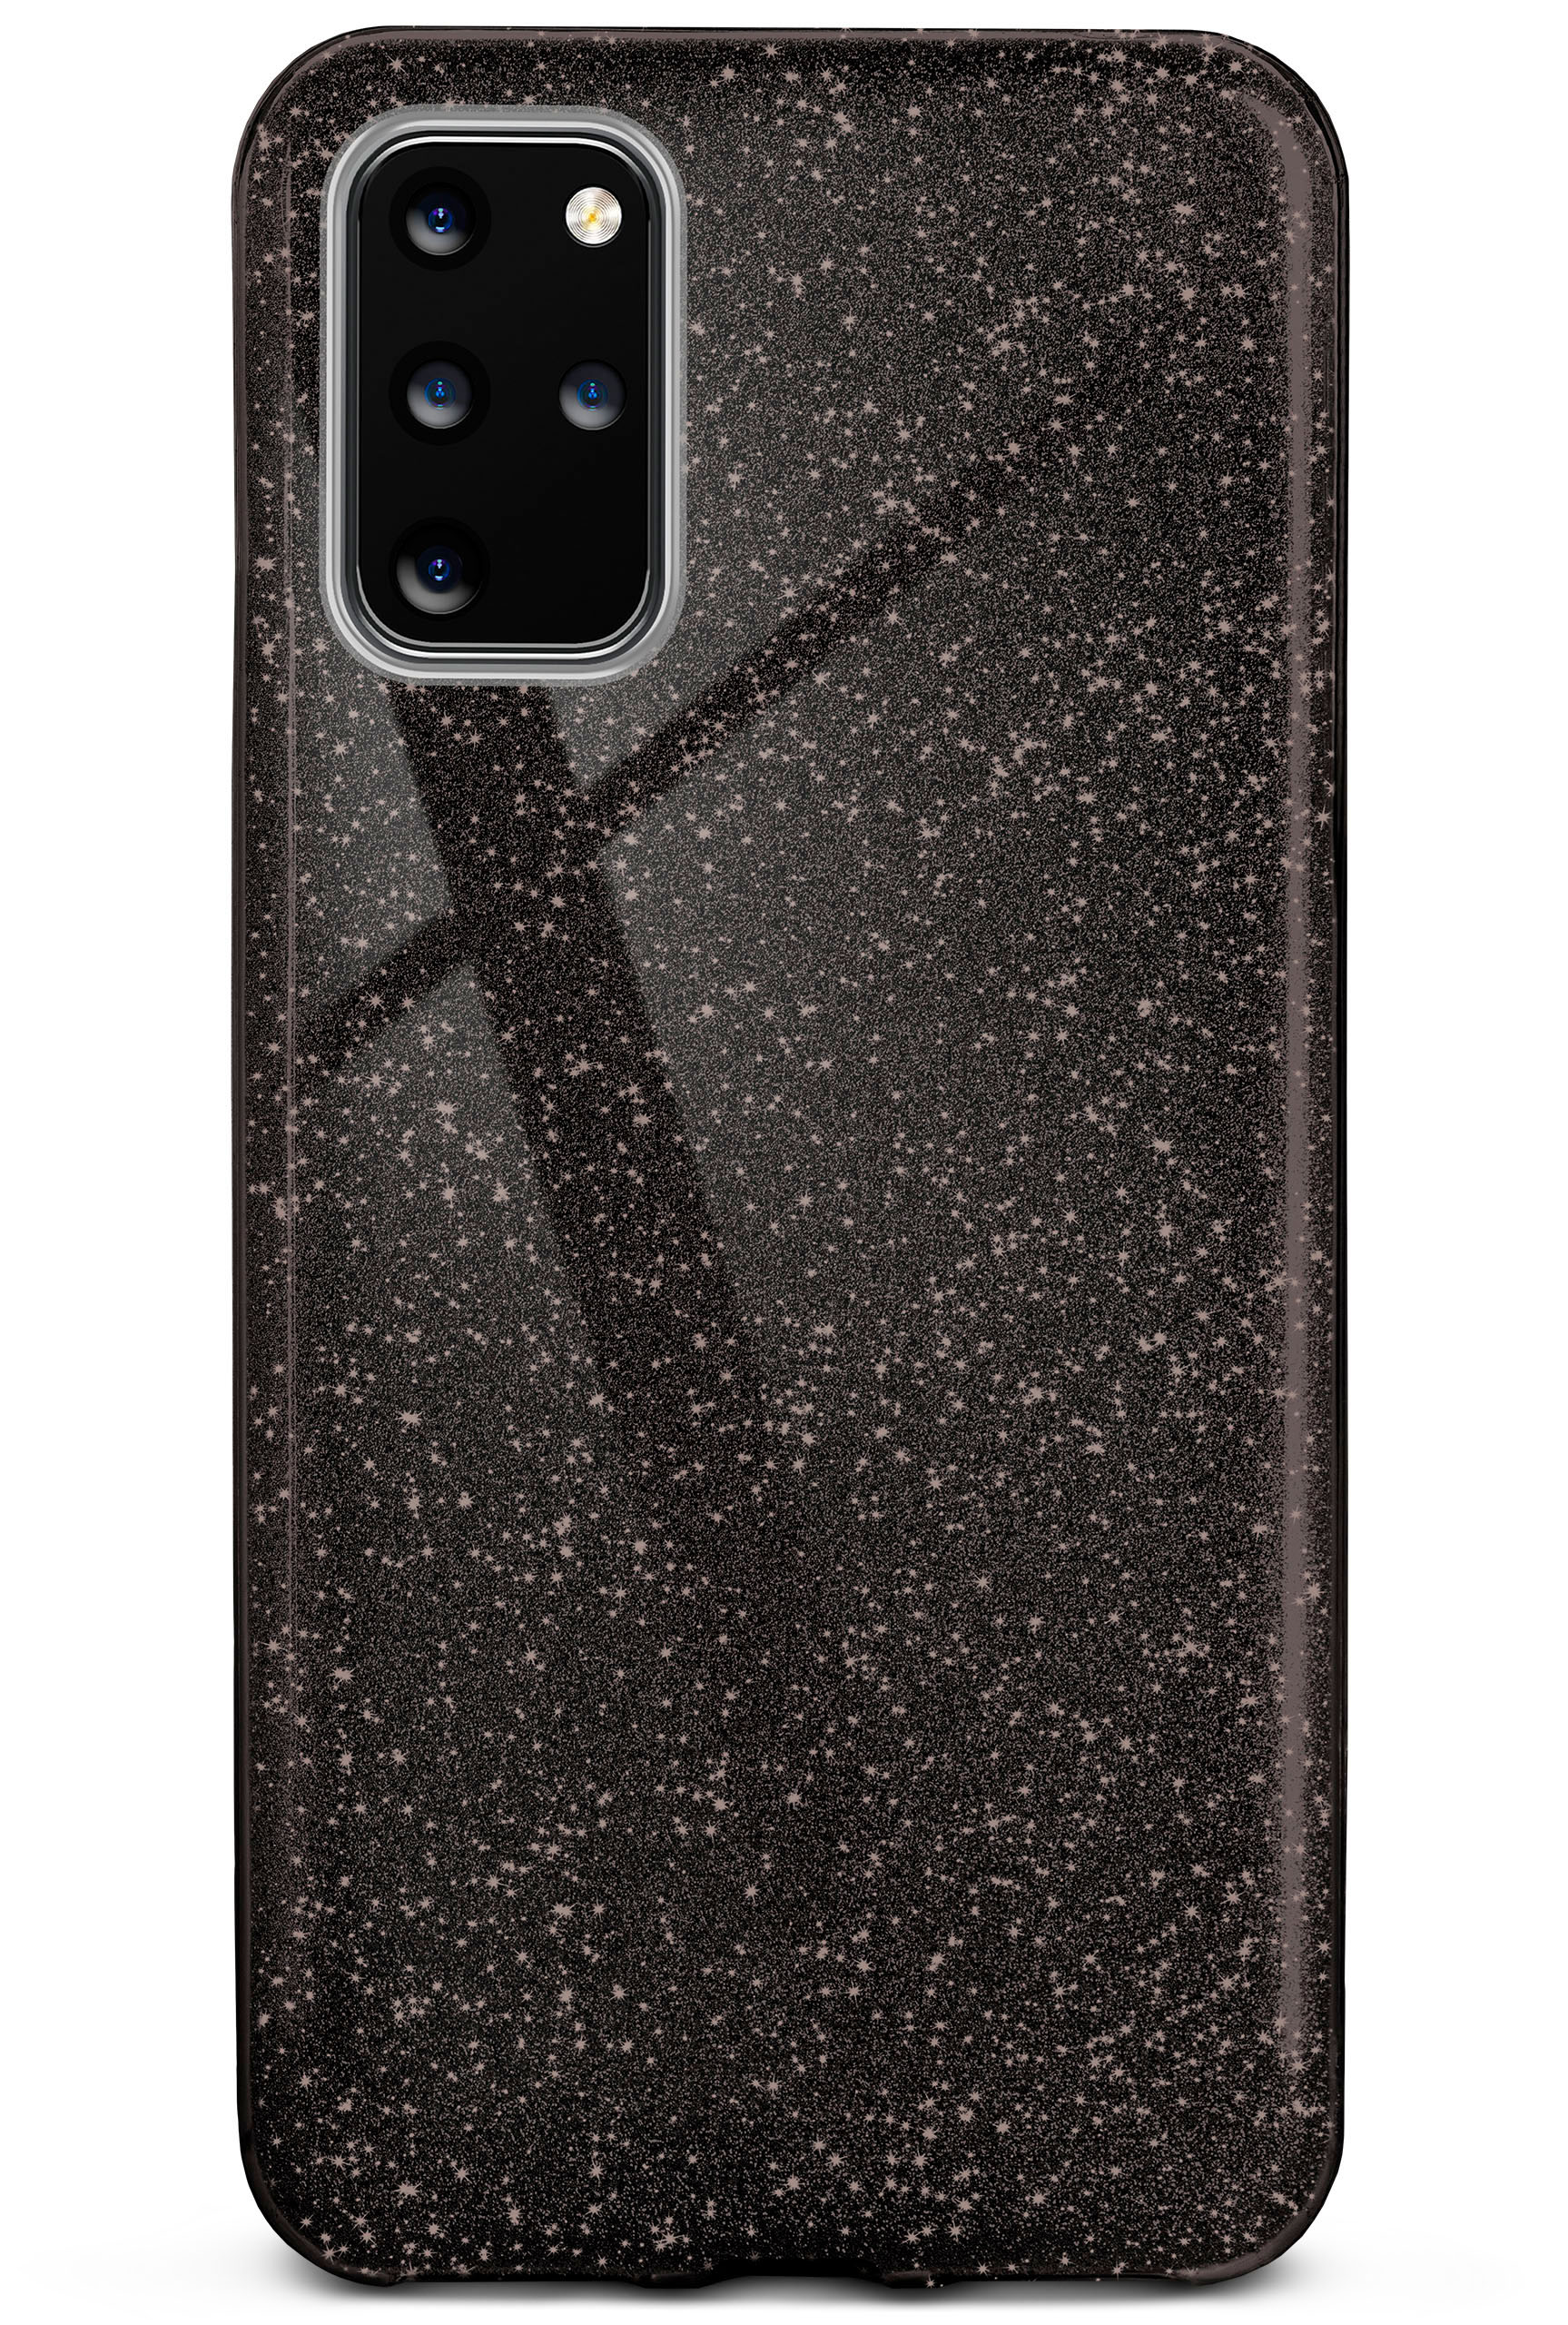 / S20 Plus Glamour - 5G, Samsung, Case, ONEFLOW Backcover, Galaxy Glitter Black